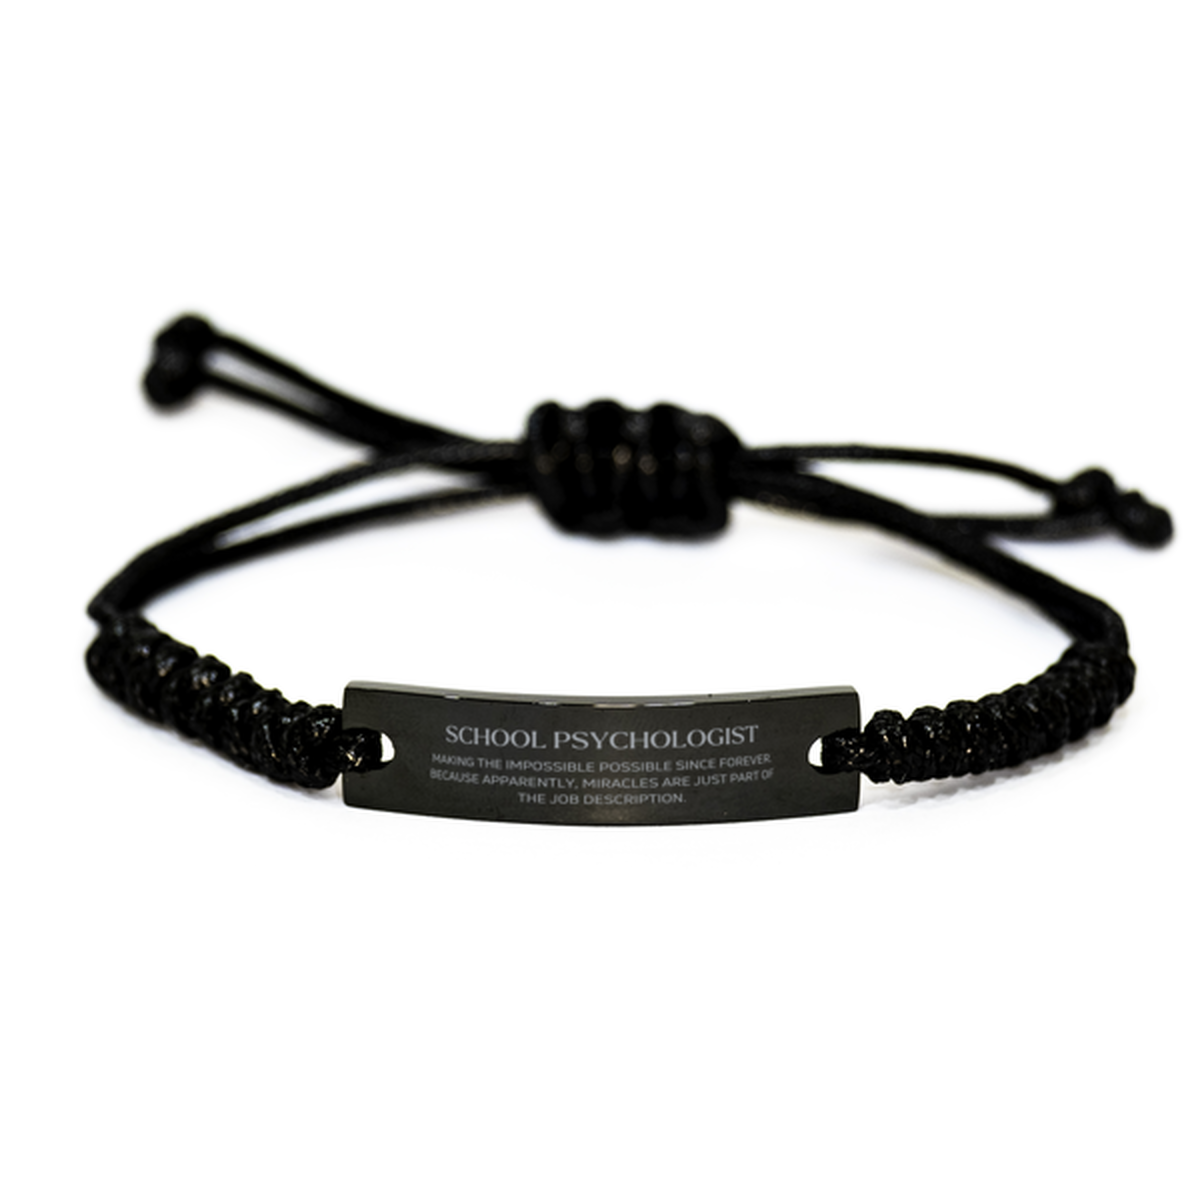 Funny School Psychologist Gifts, Miracles are just part of the job description, Inspirational Birthday Black Rope Bracelet For School Psychologist, Men, Women, Coworkers, Friends, Boss